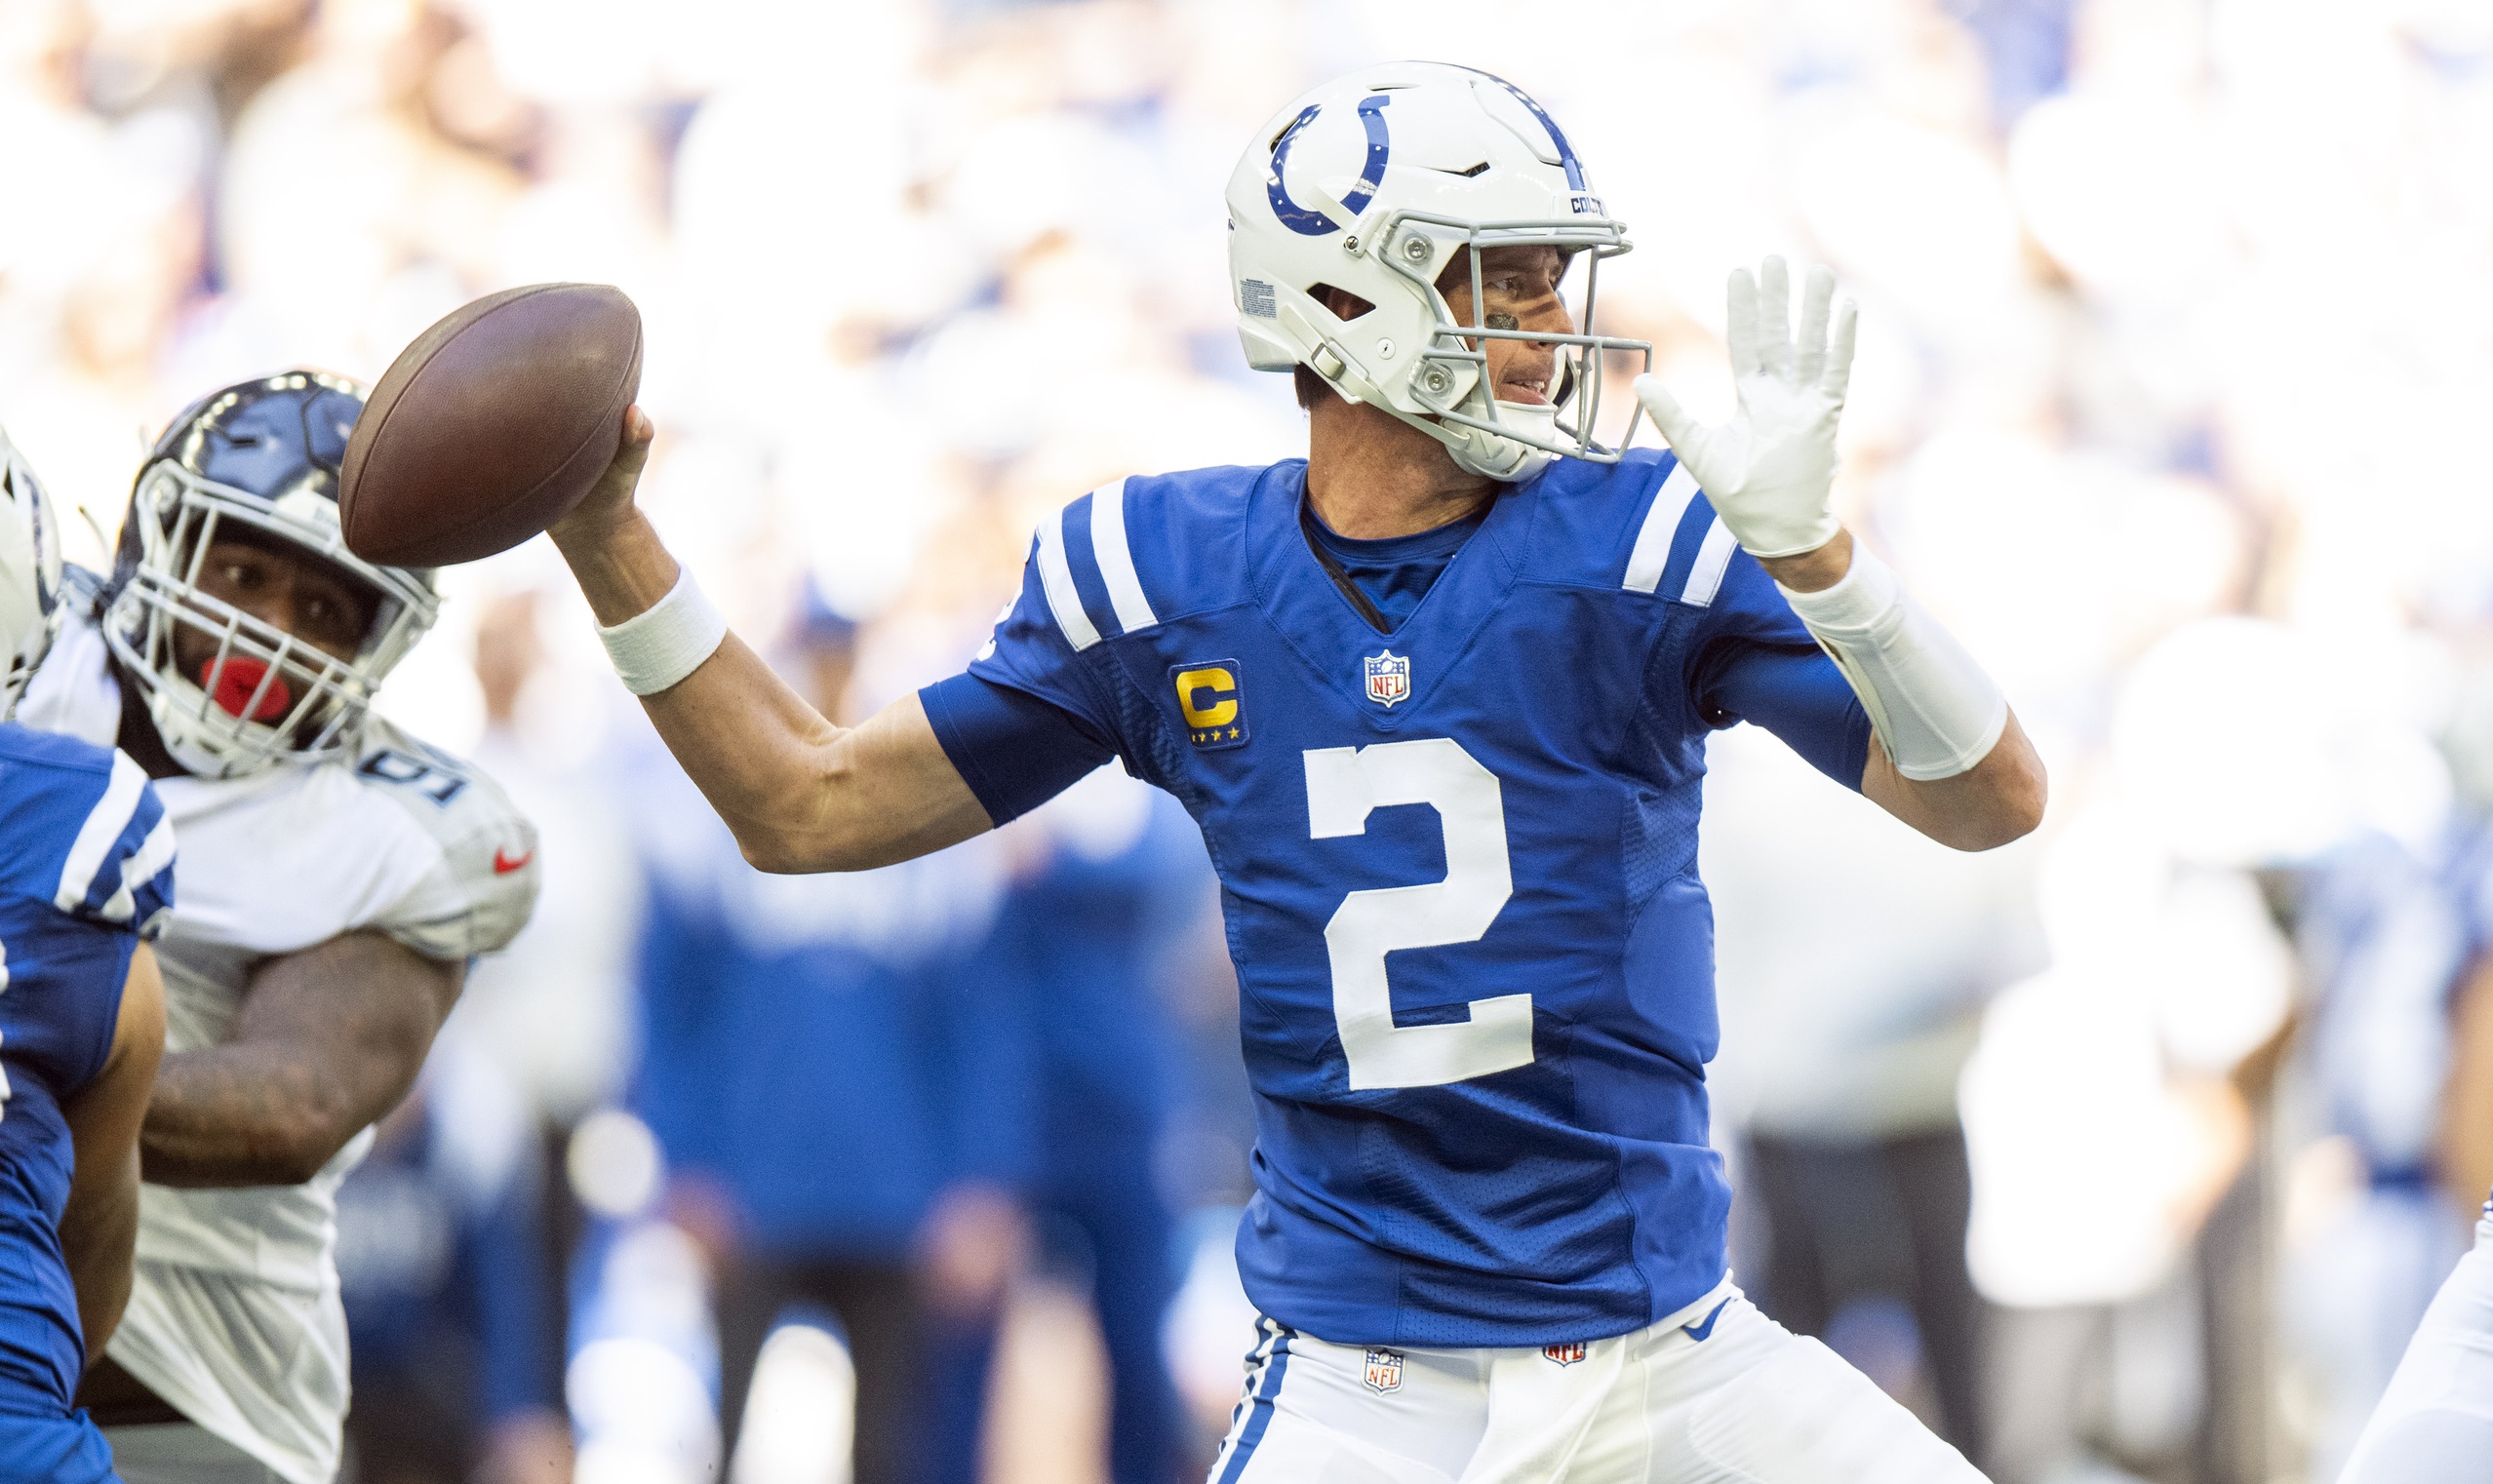 colts television schedule